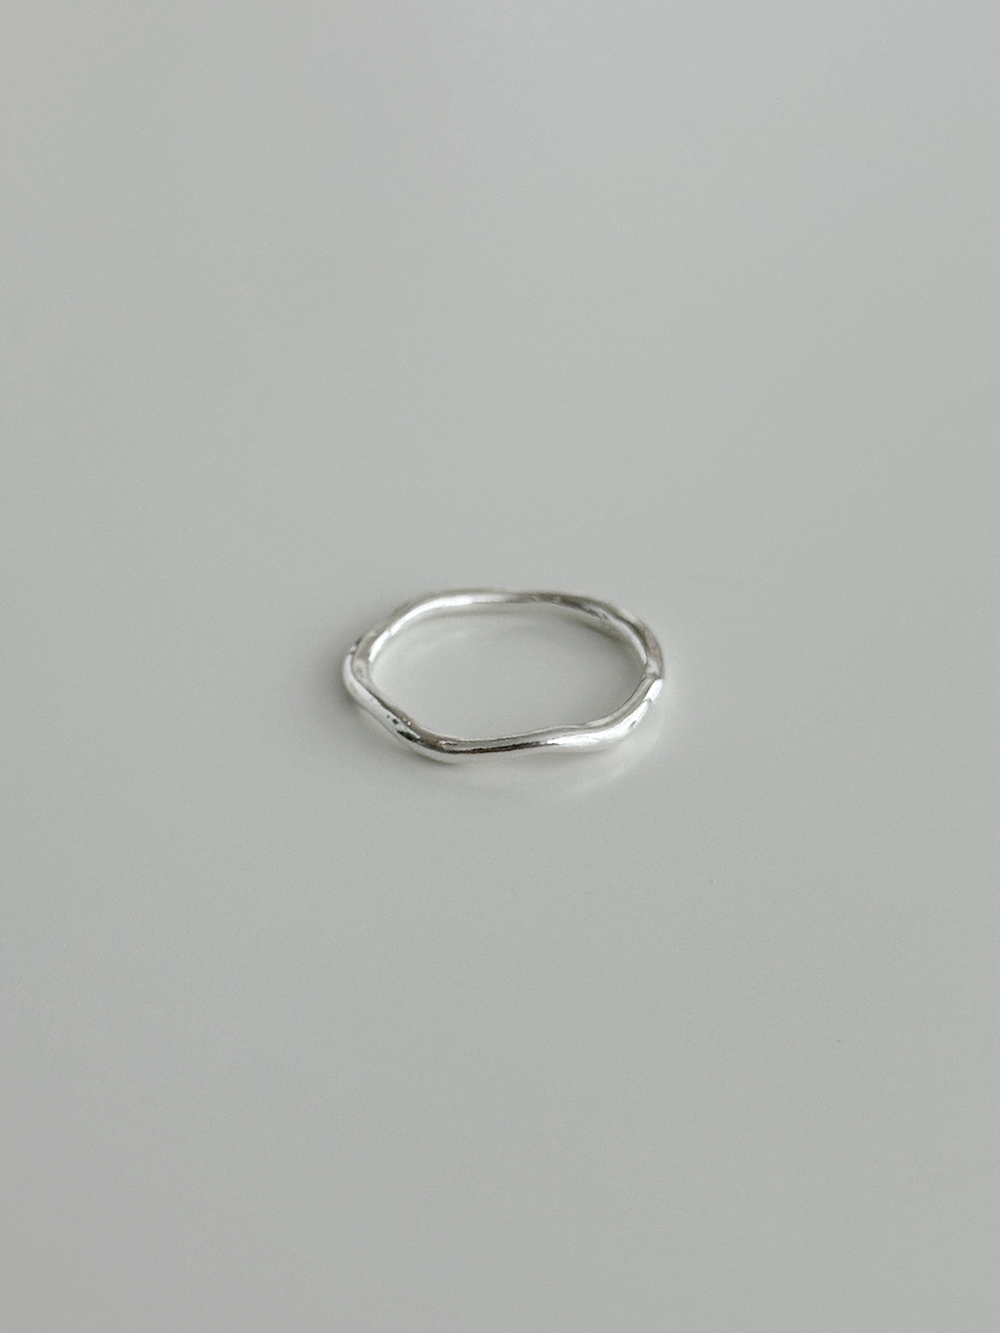 2mm ROUGH WAVE RING